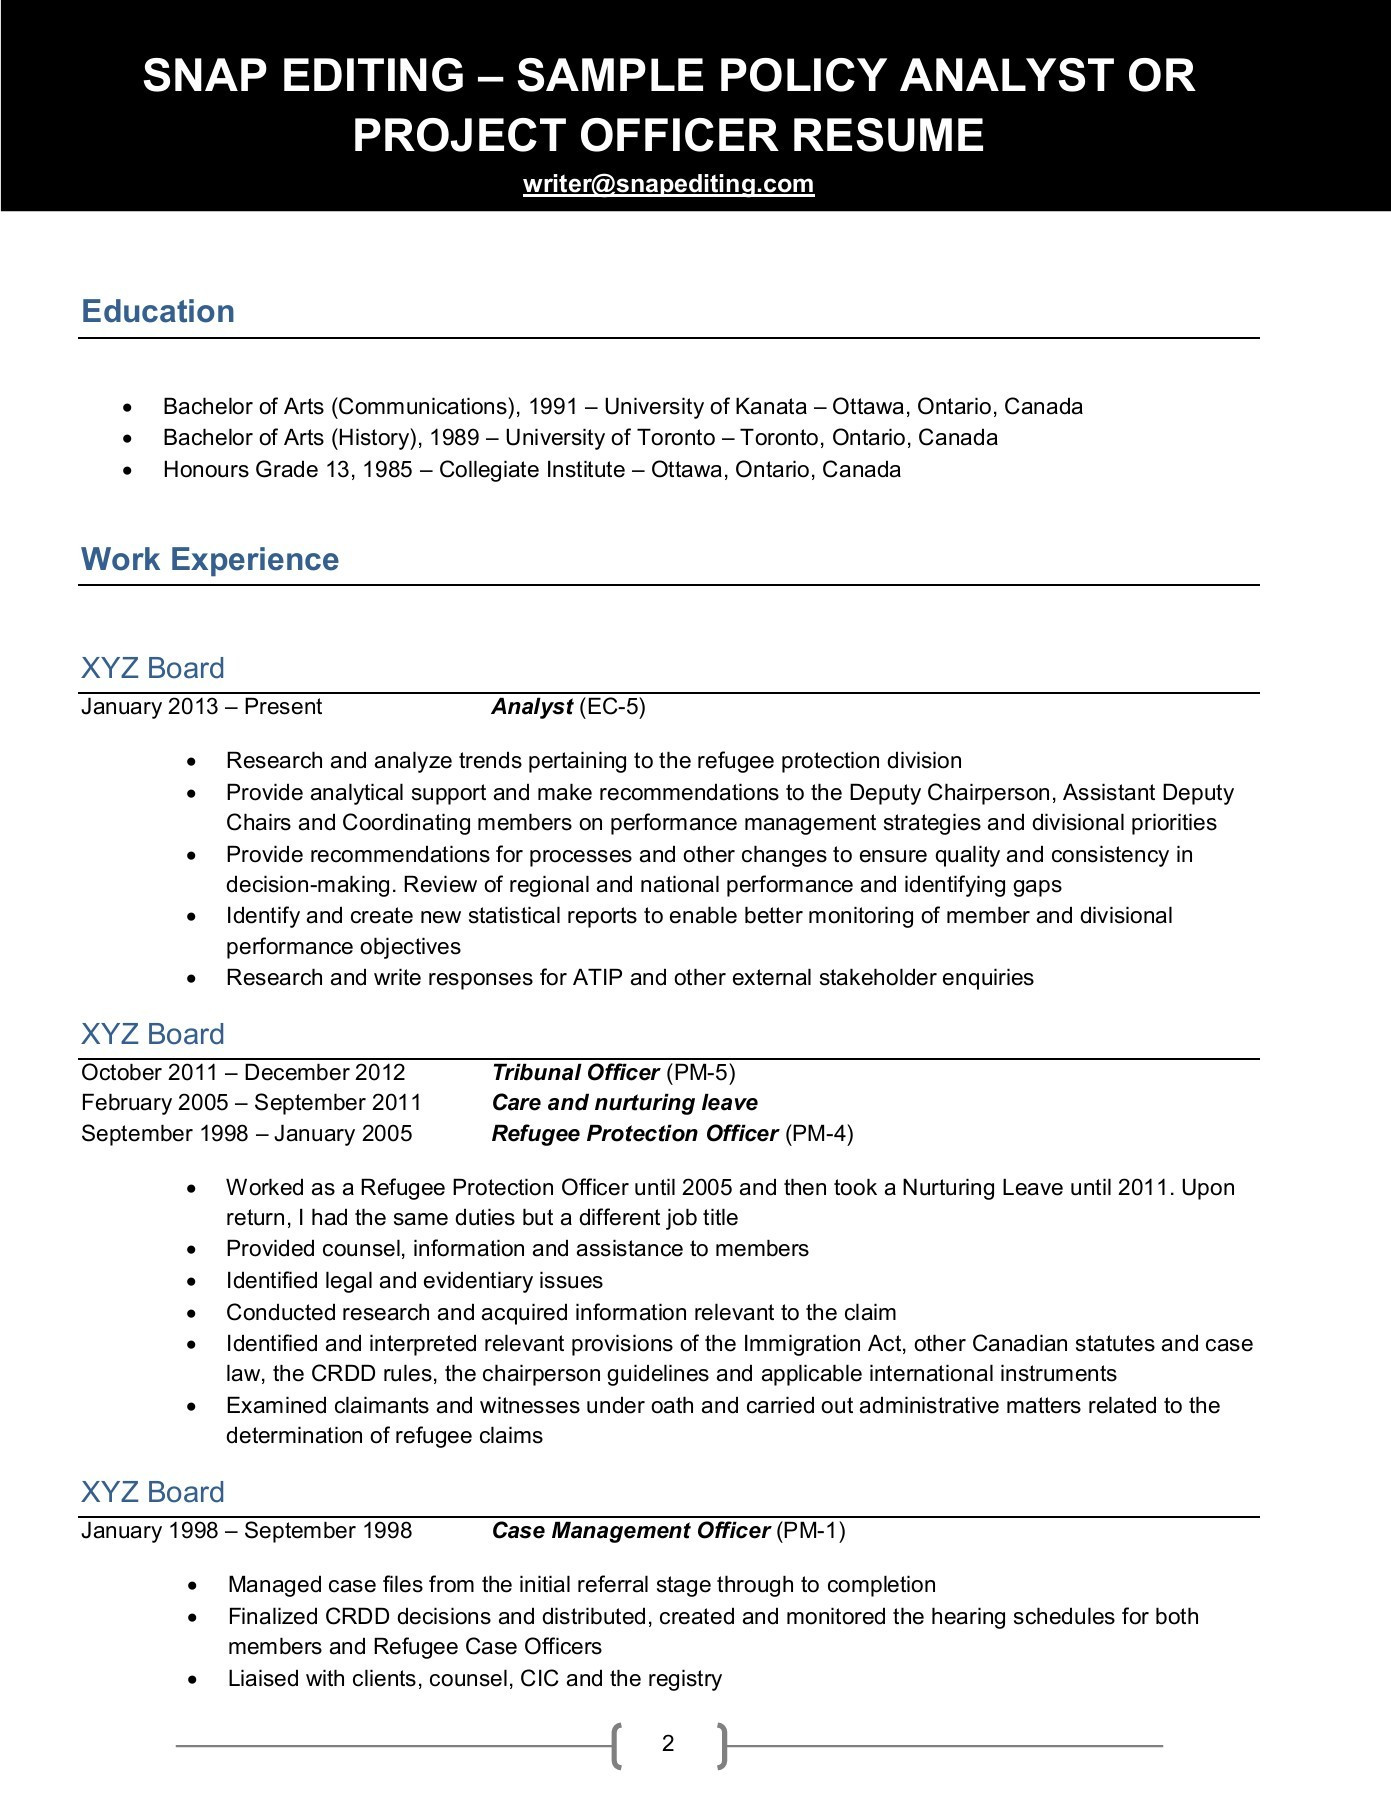 Sample Resume for Public Policy Analyst Sample 20 after – Policy Analyst or Project Officer – Flipbook by …